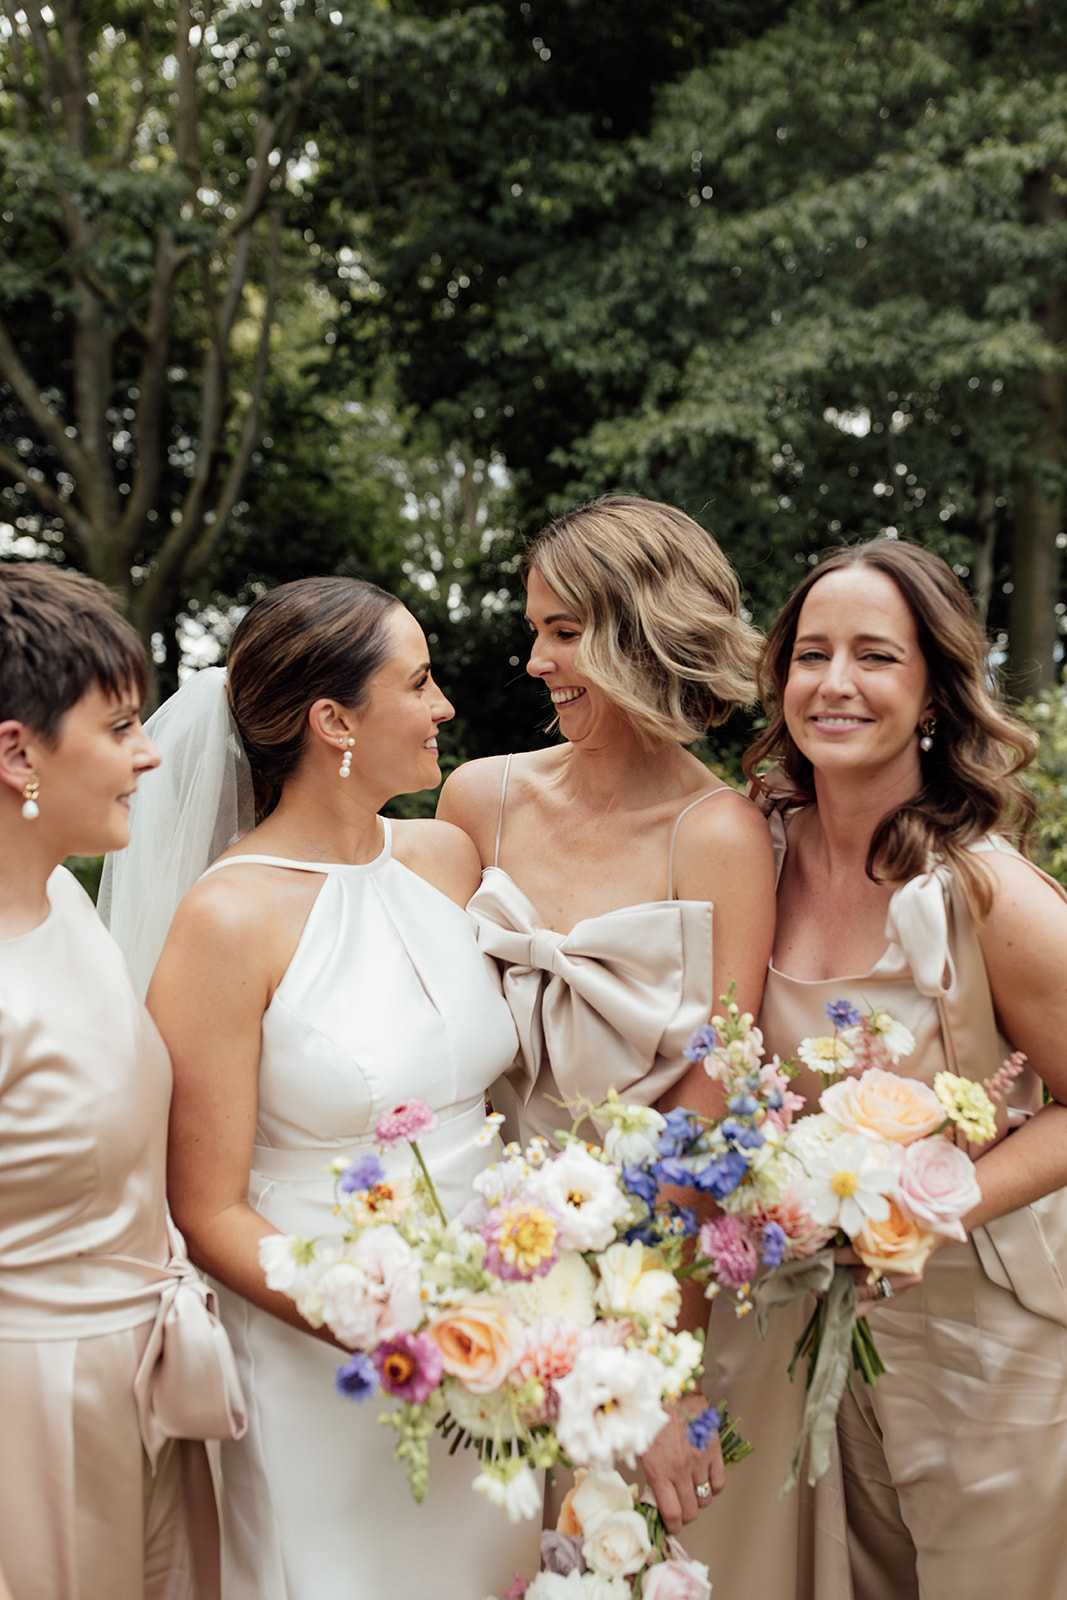 Layne by Karen Willis Holmes-halter neckline wedding dress-Jessica & Tim- Bride is seen taking wedding photos with her beautiful bridesmaids, wearing soft champagne and pink toned dresses. Bride has chosen the classic Layne gown from the BESPOKE collection, featuring a sophisticated high neck line.